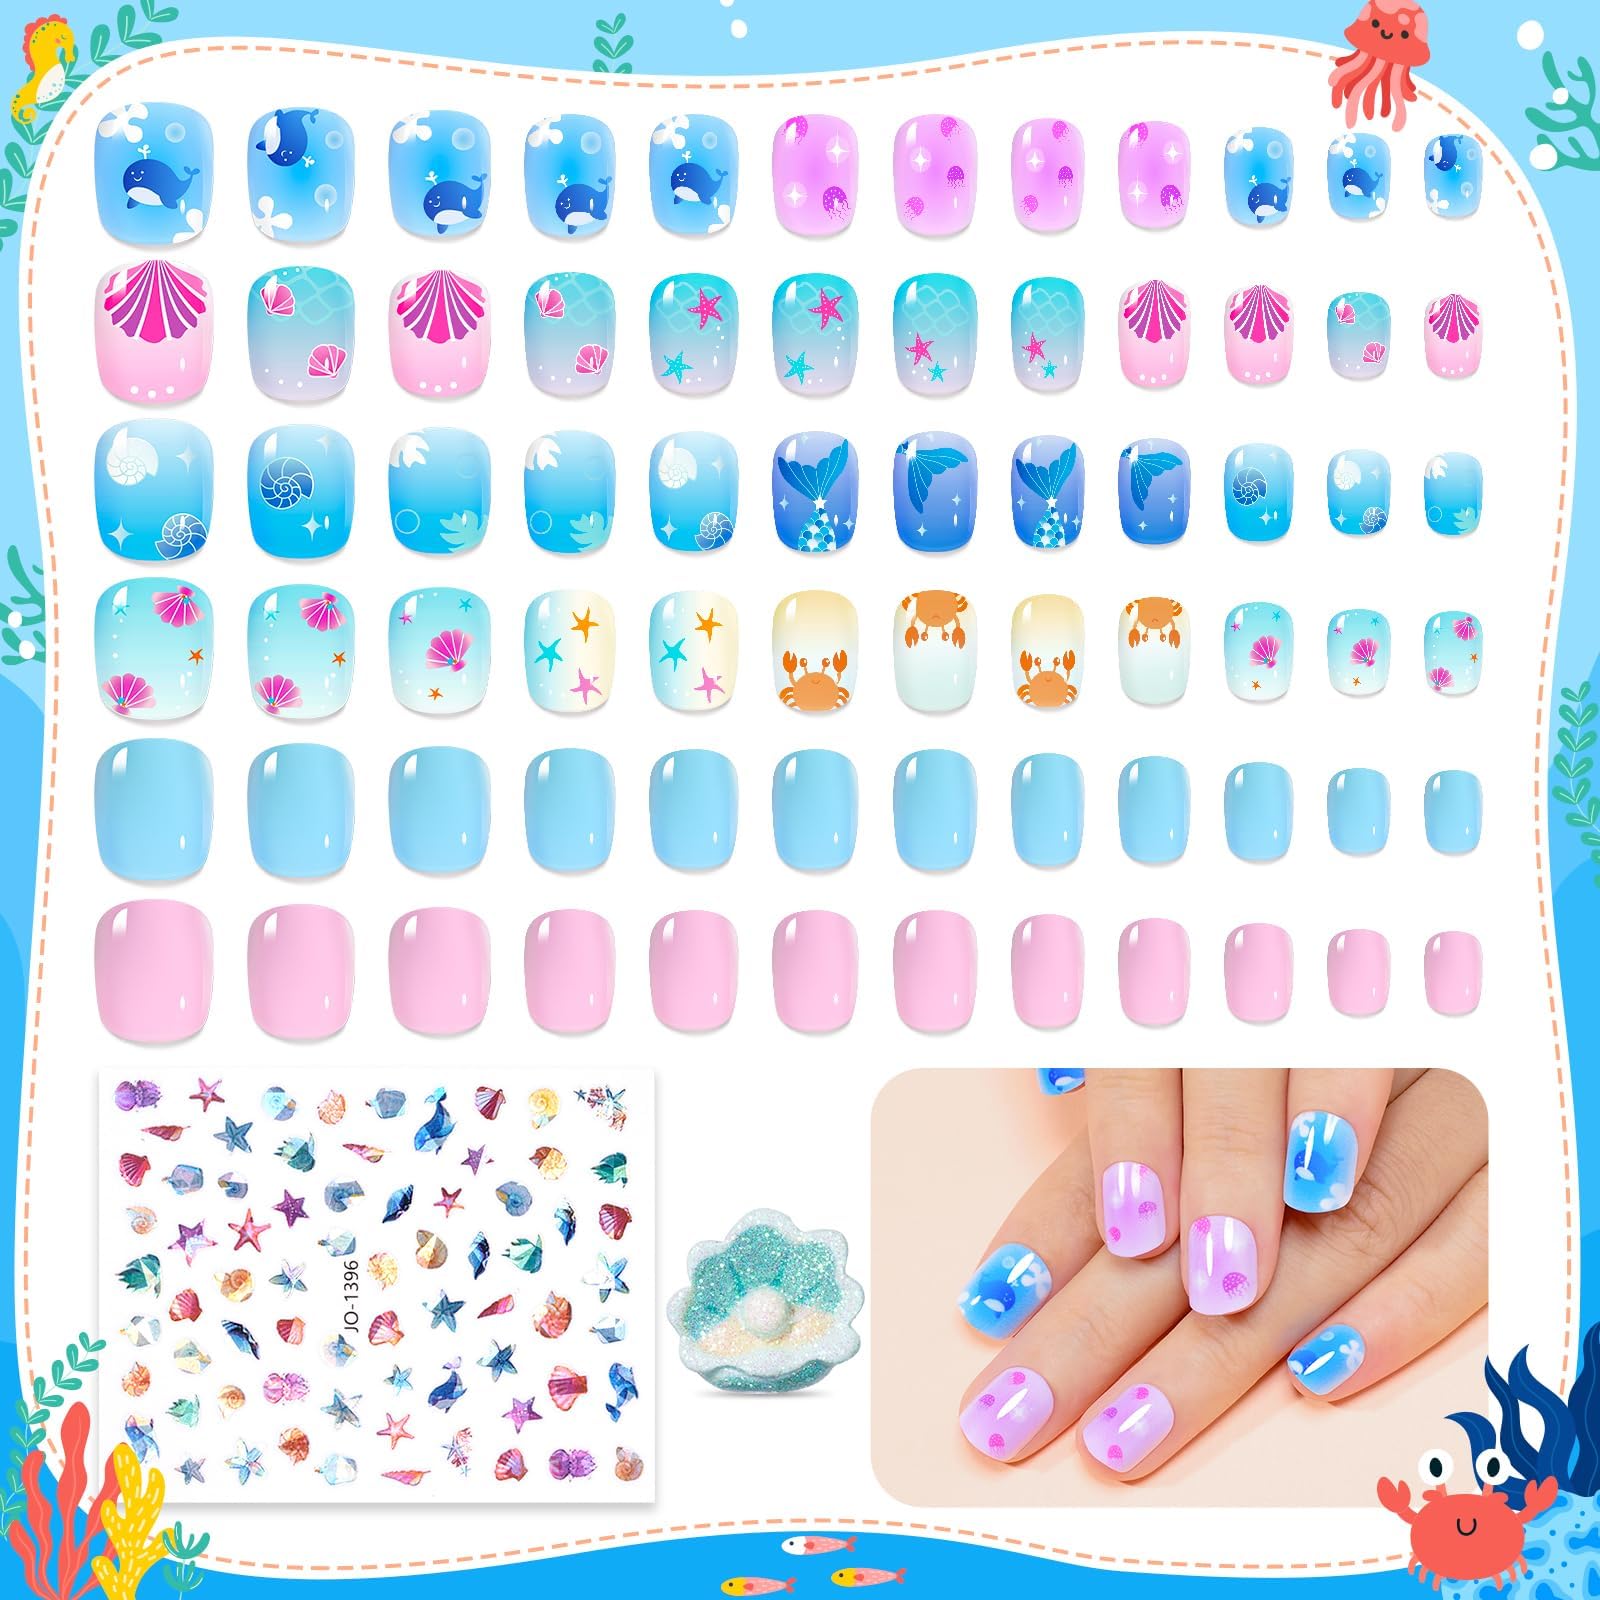 Kids Press-on Nails | Short Square Press On Nails 144 Pcs in 12 Sizes